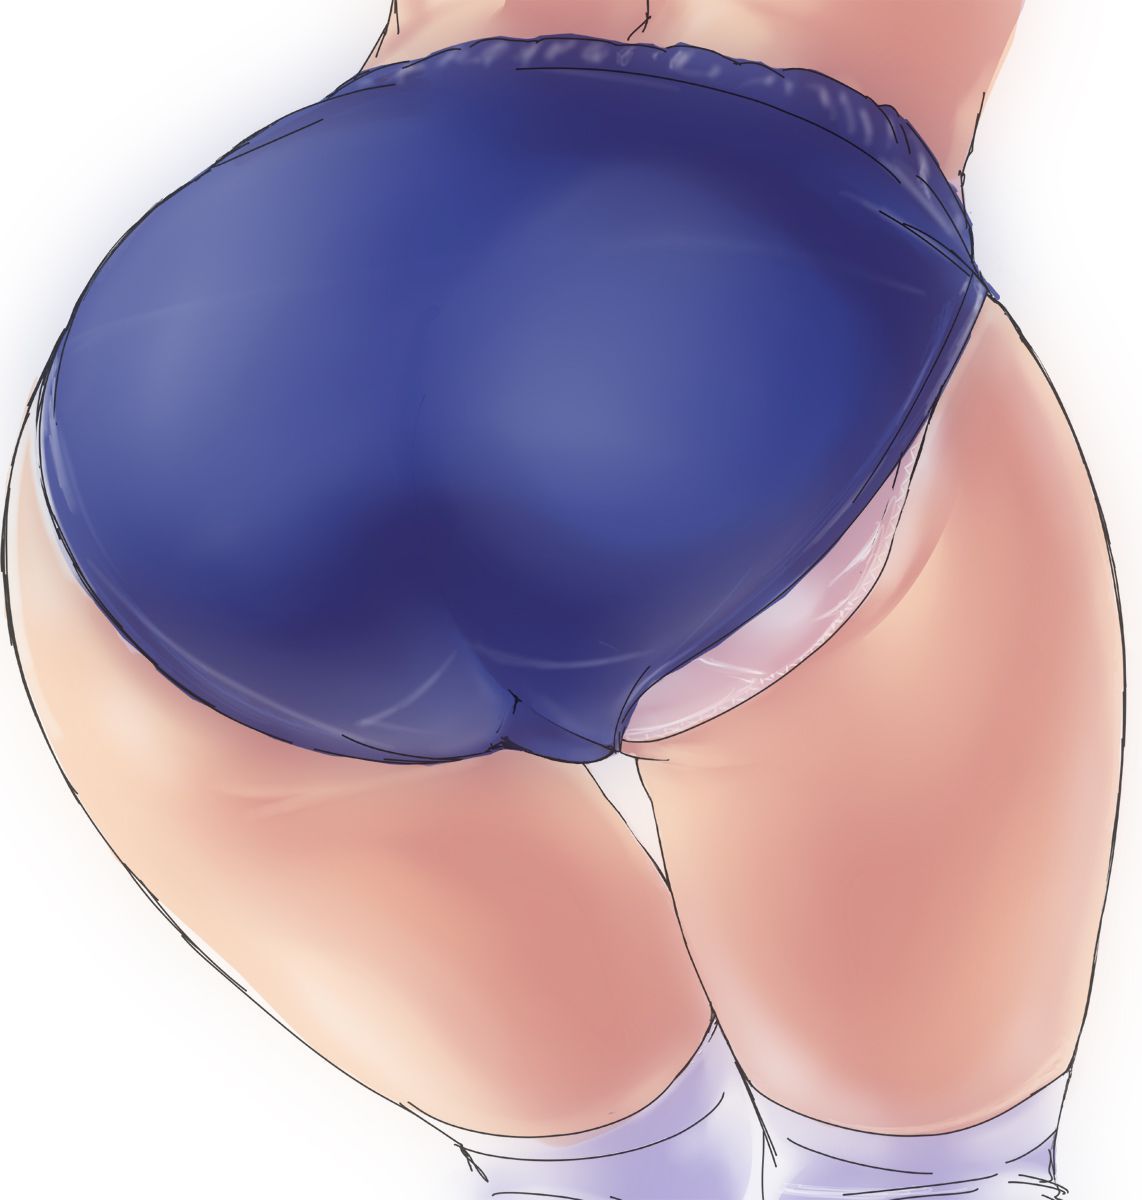 Erotic anime summary Erotic images seen up close such as ass and pants [secondary erotic] 19